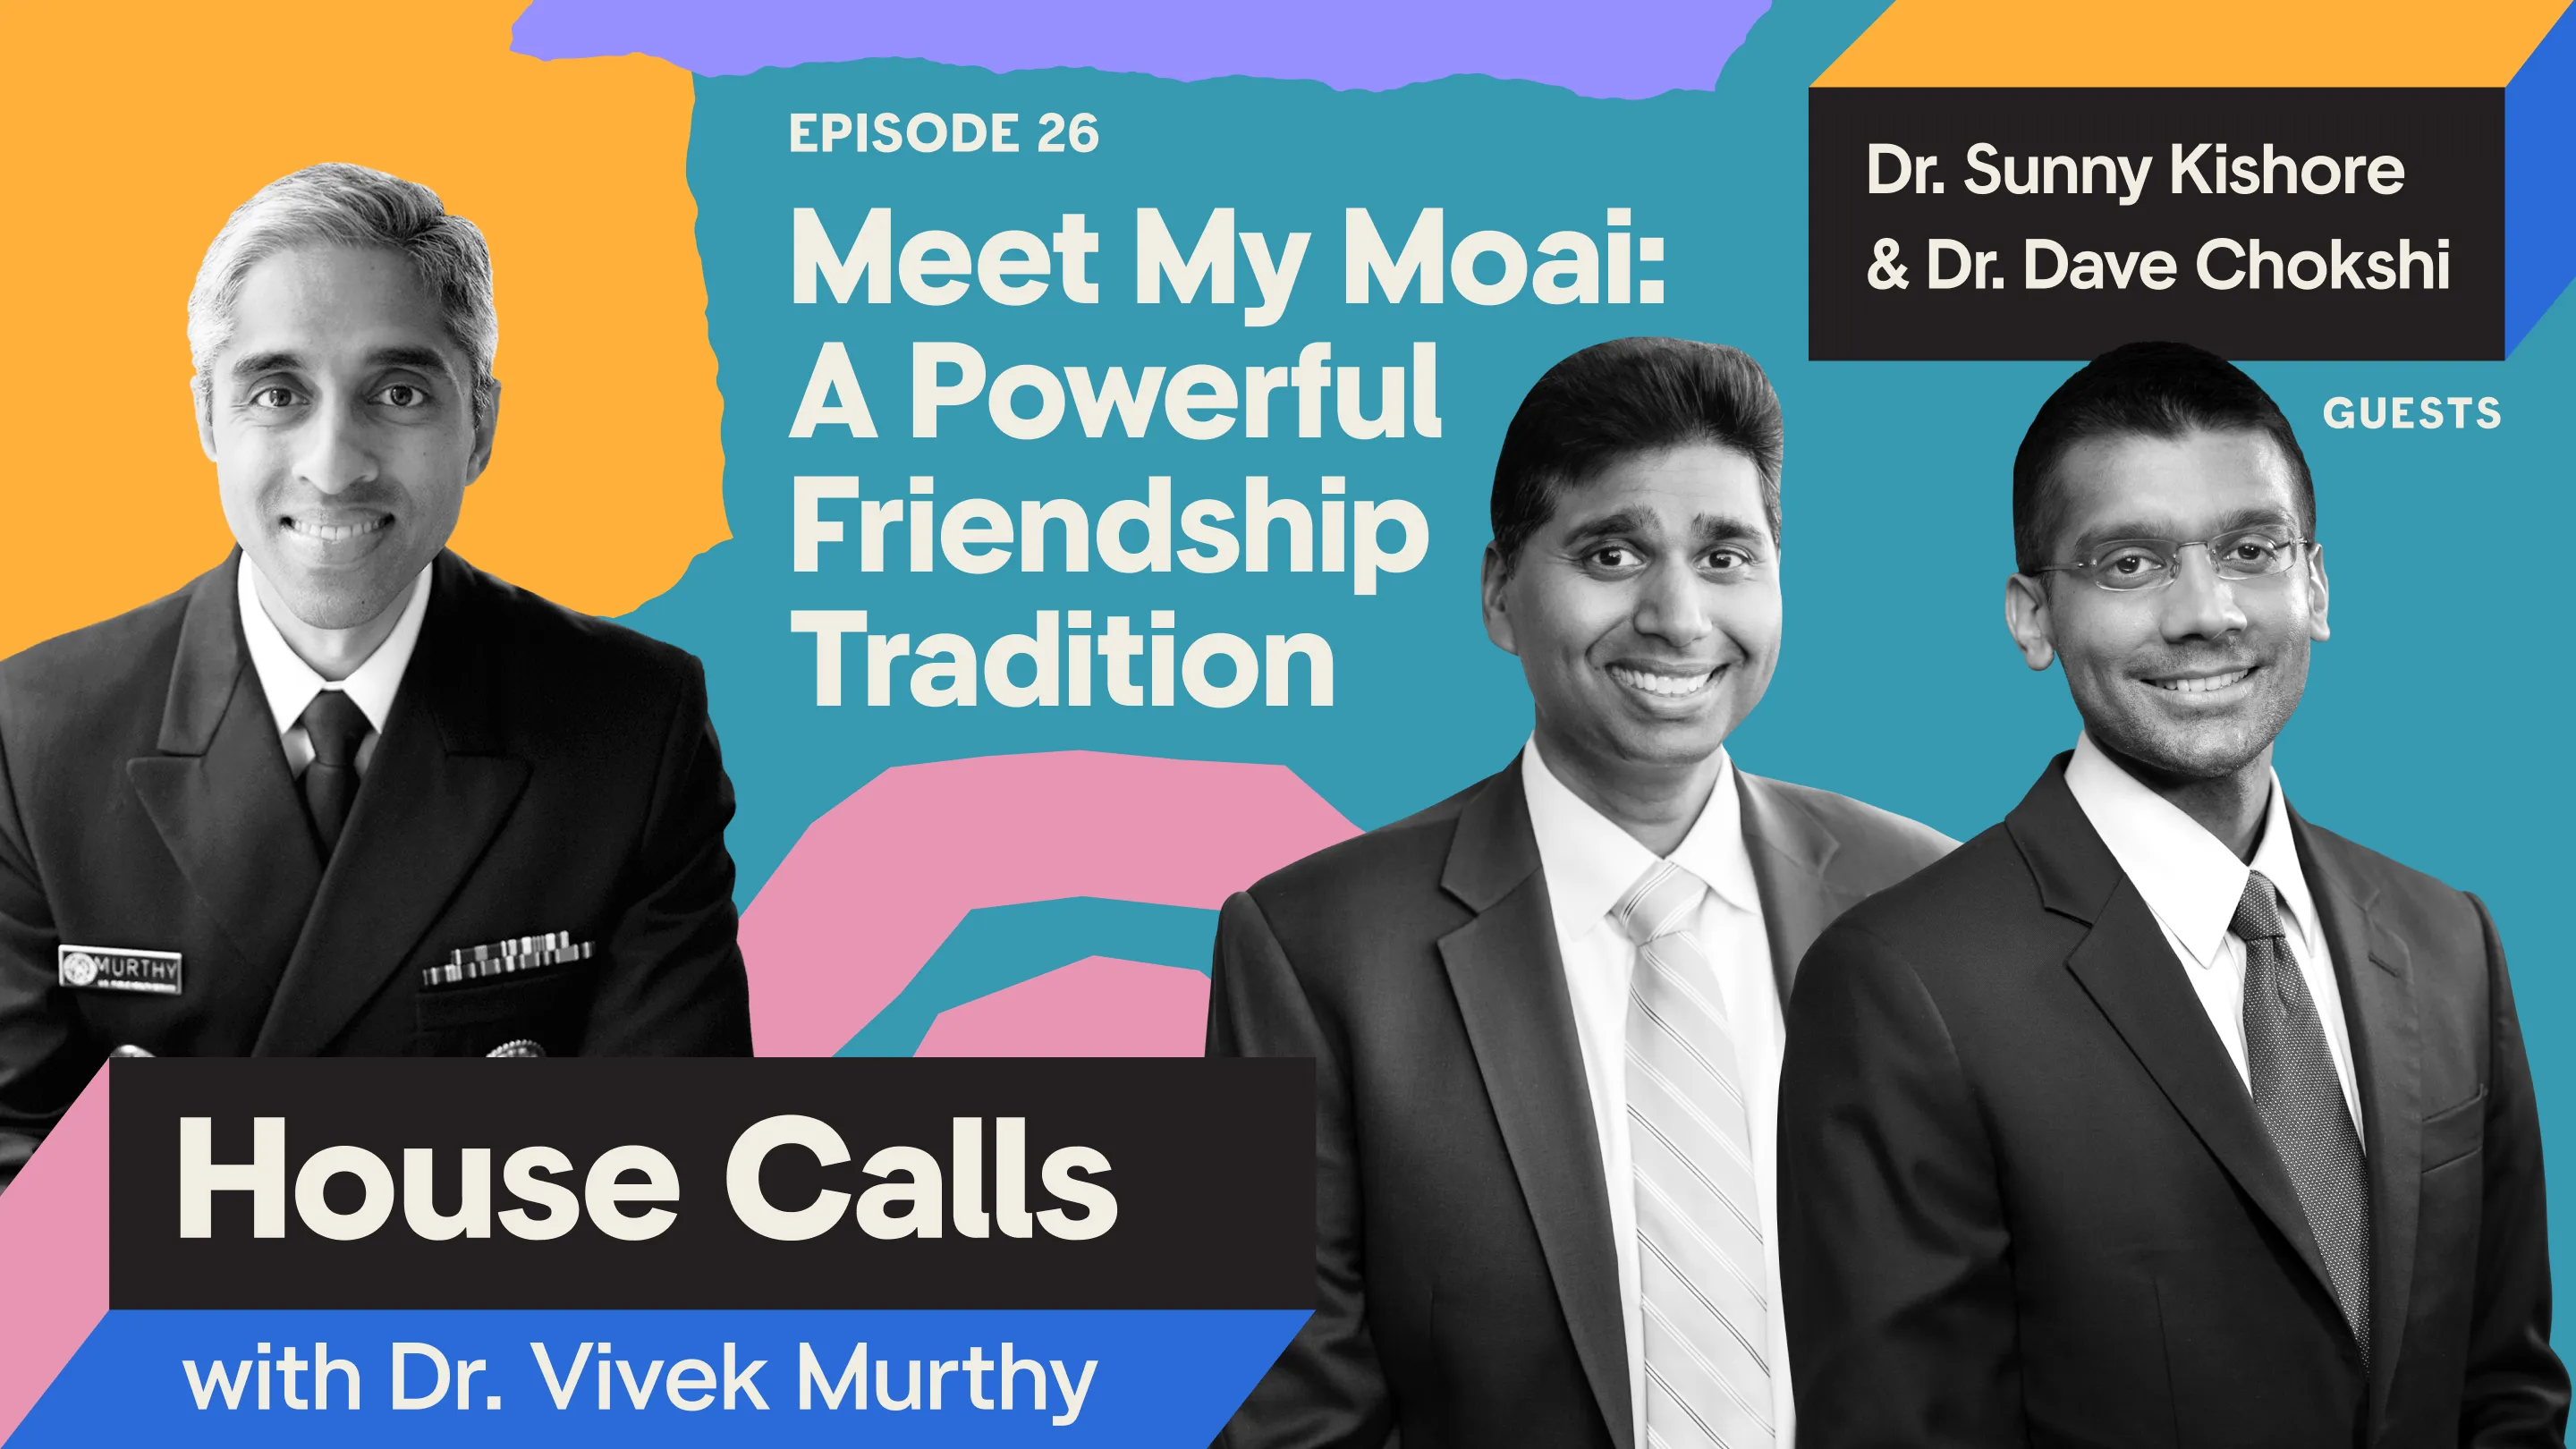 Black and white portraits of Surgeon General Vivek Murthy, Dr. Sandeep (Sunny) Kishore and Dr. Dave Chokshi with a colorful background.